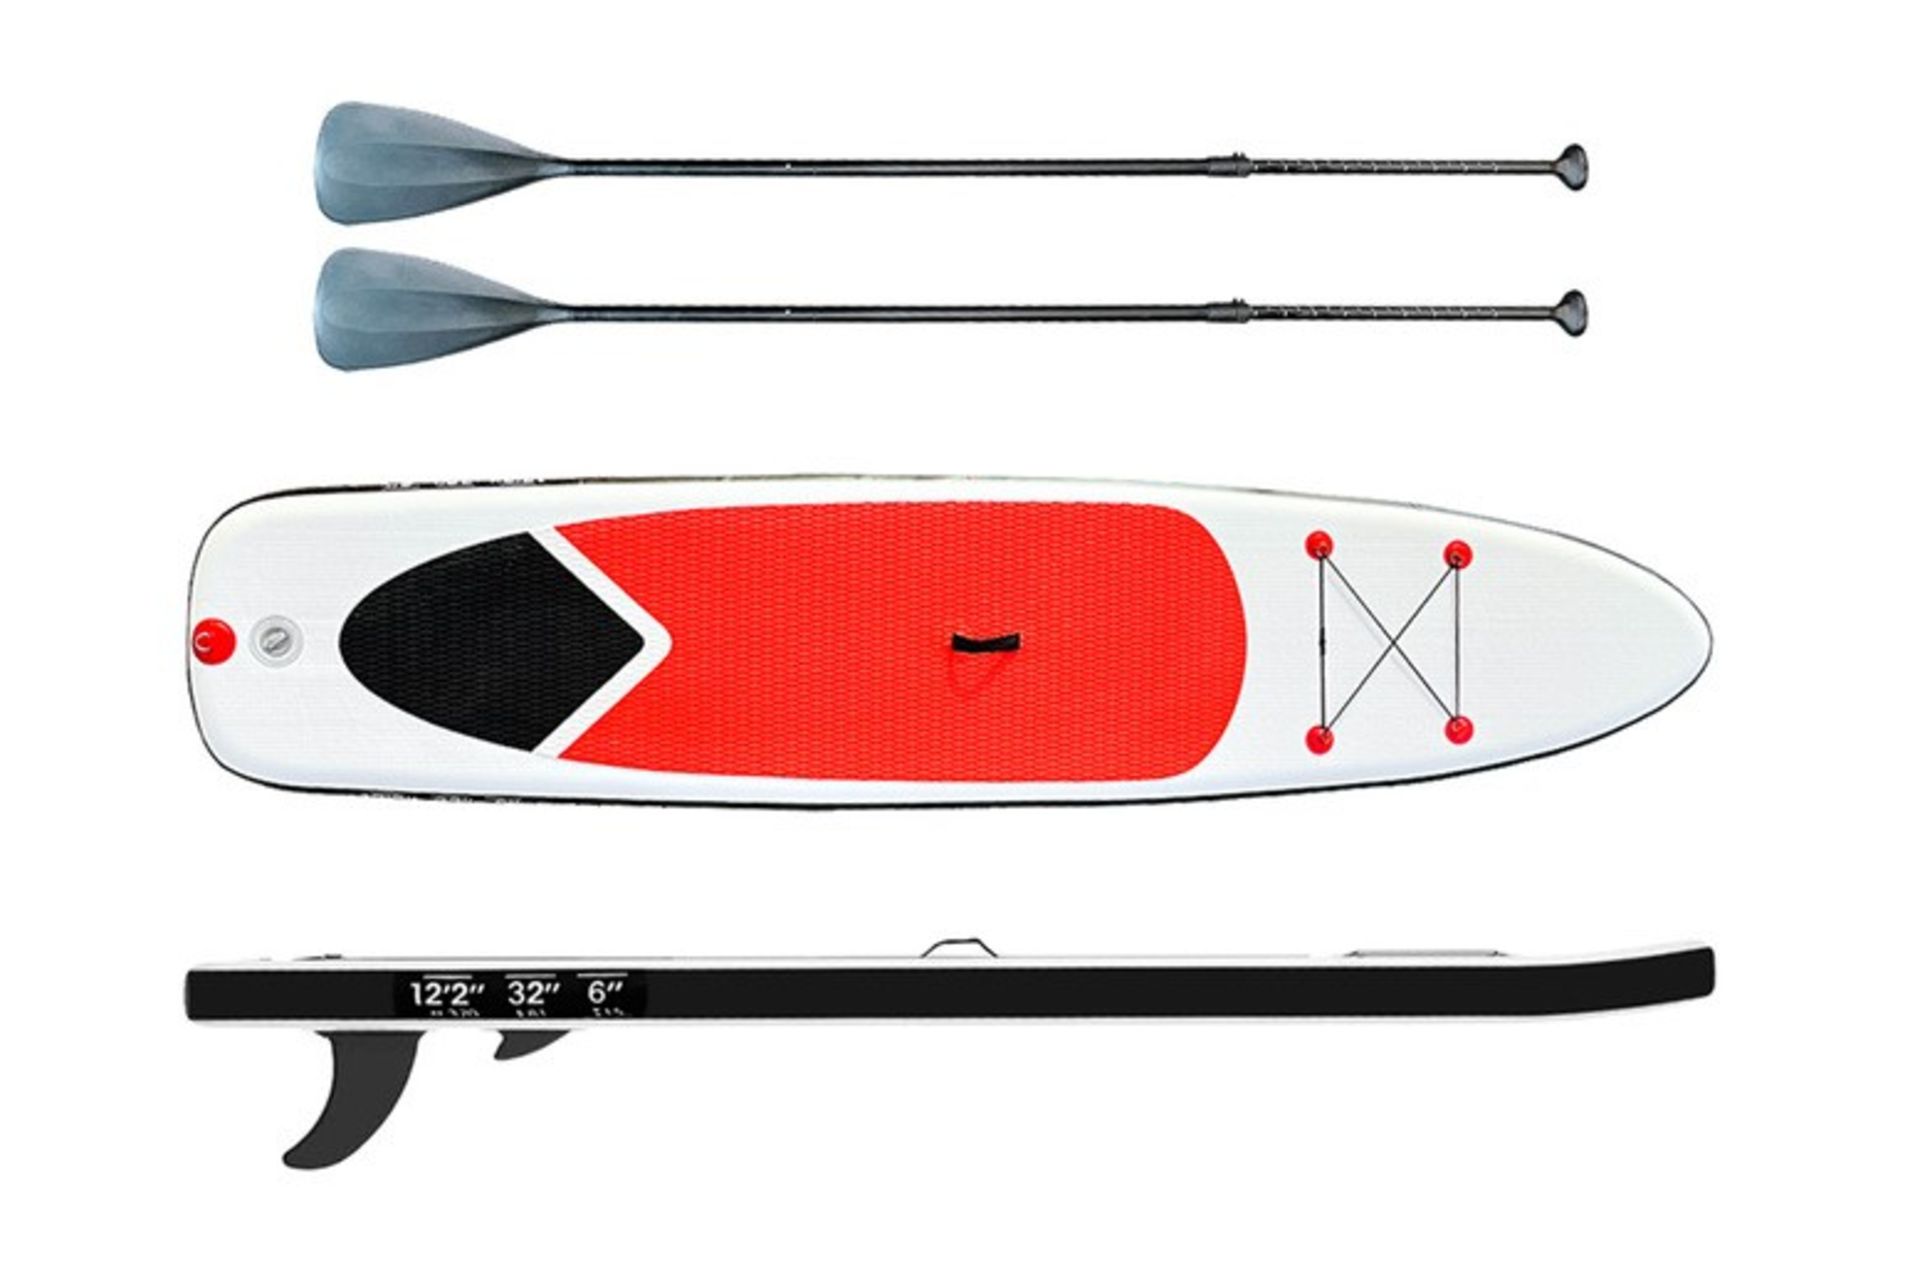 LARGE 2-PERSON INFLATABLE PADDLE BOARD W/ ACCESSORIES - RED